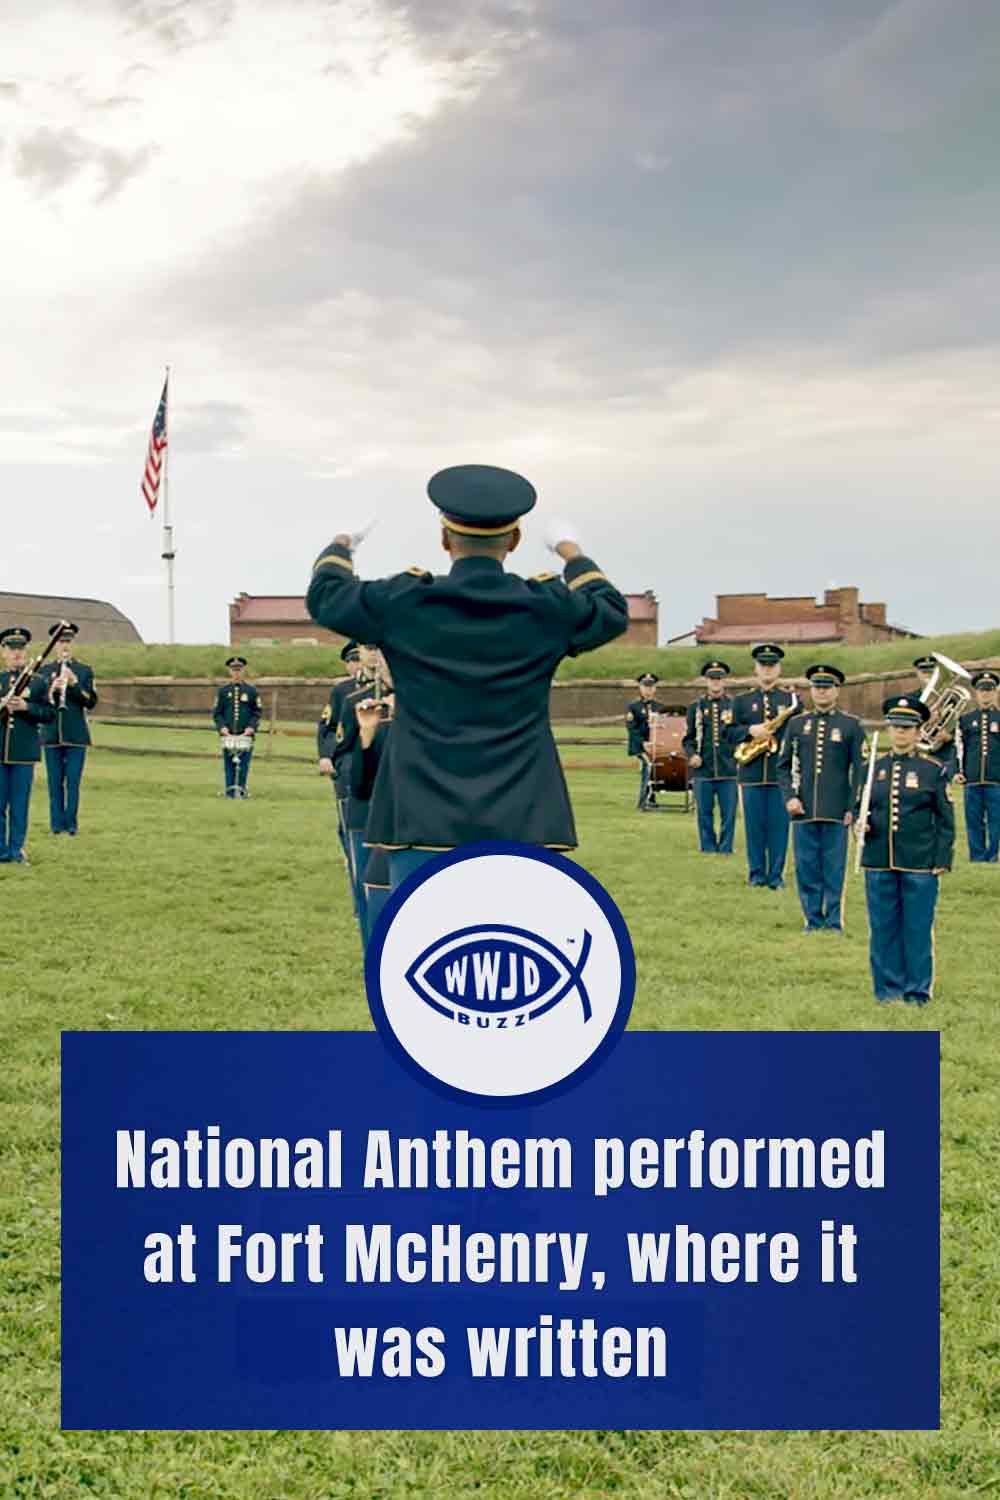 National Anthem performed at Fort McHenry, where it was written